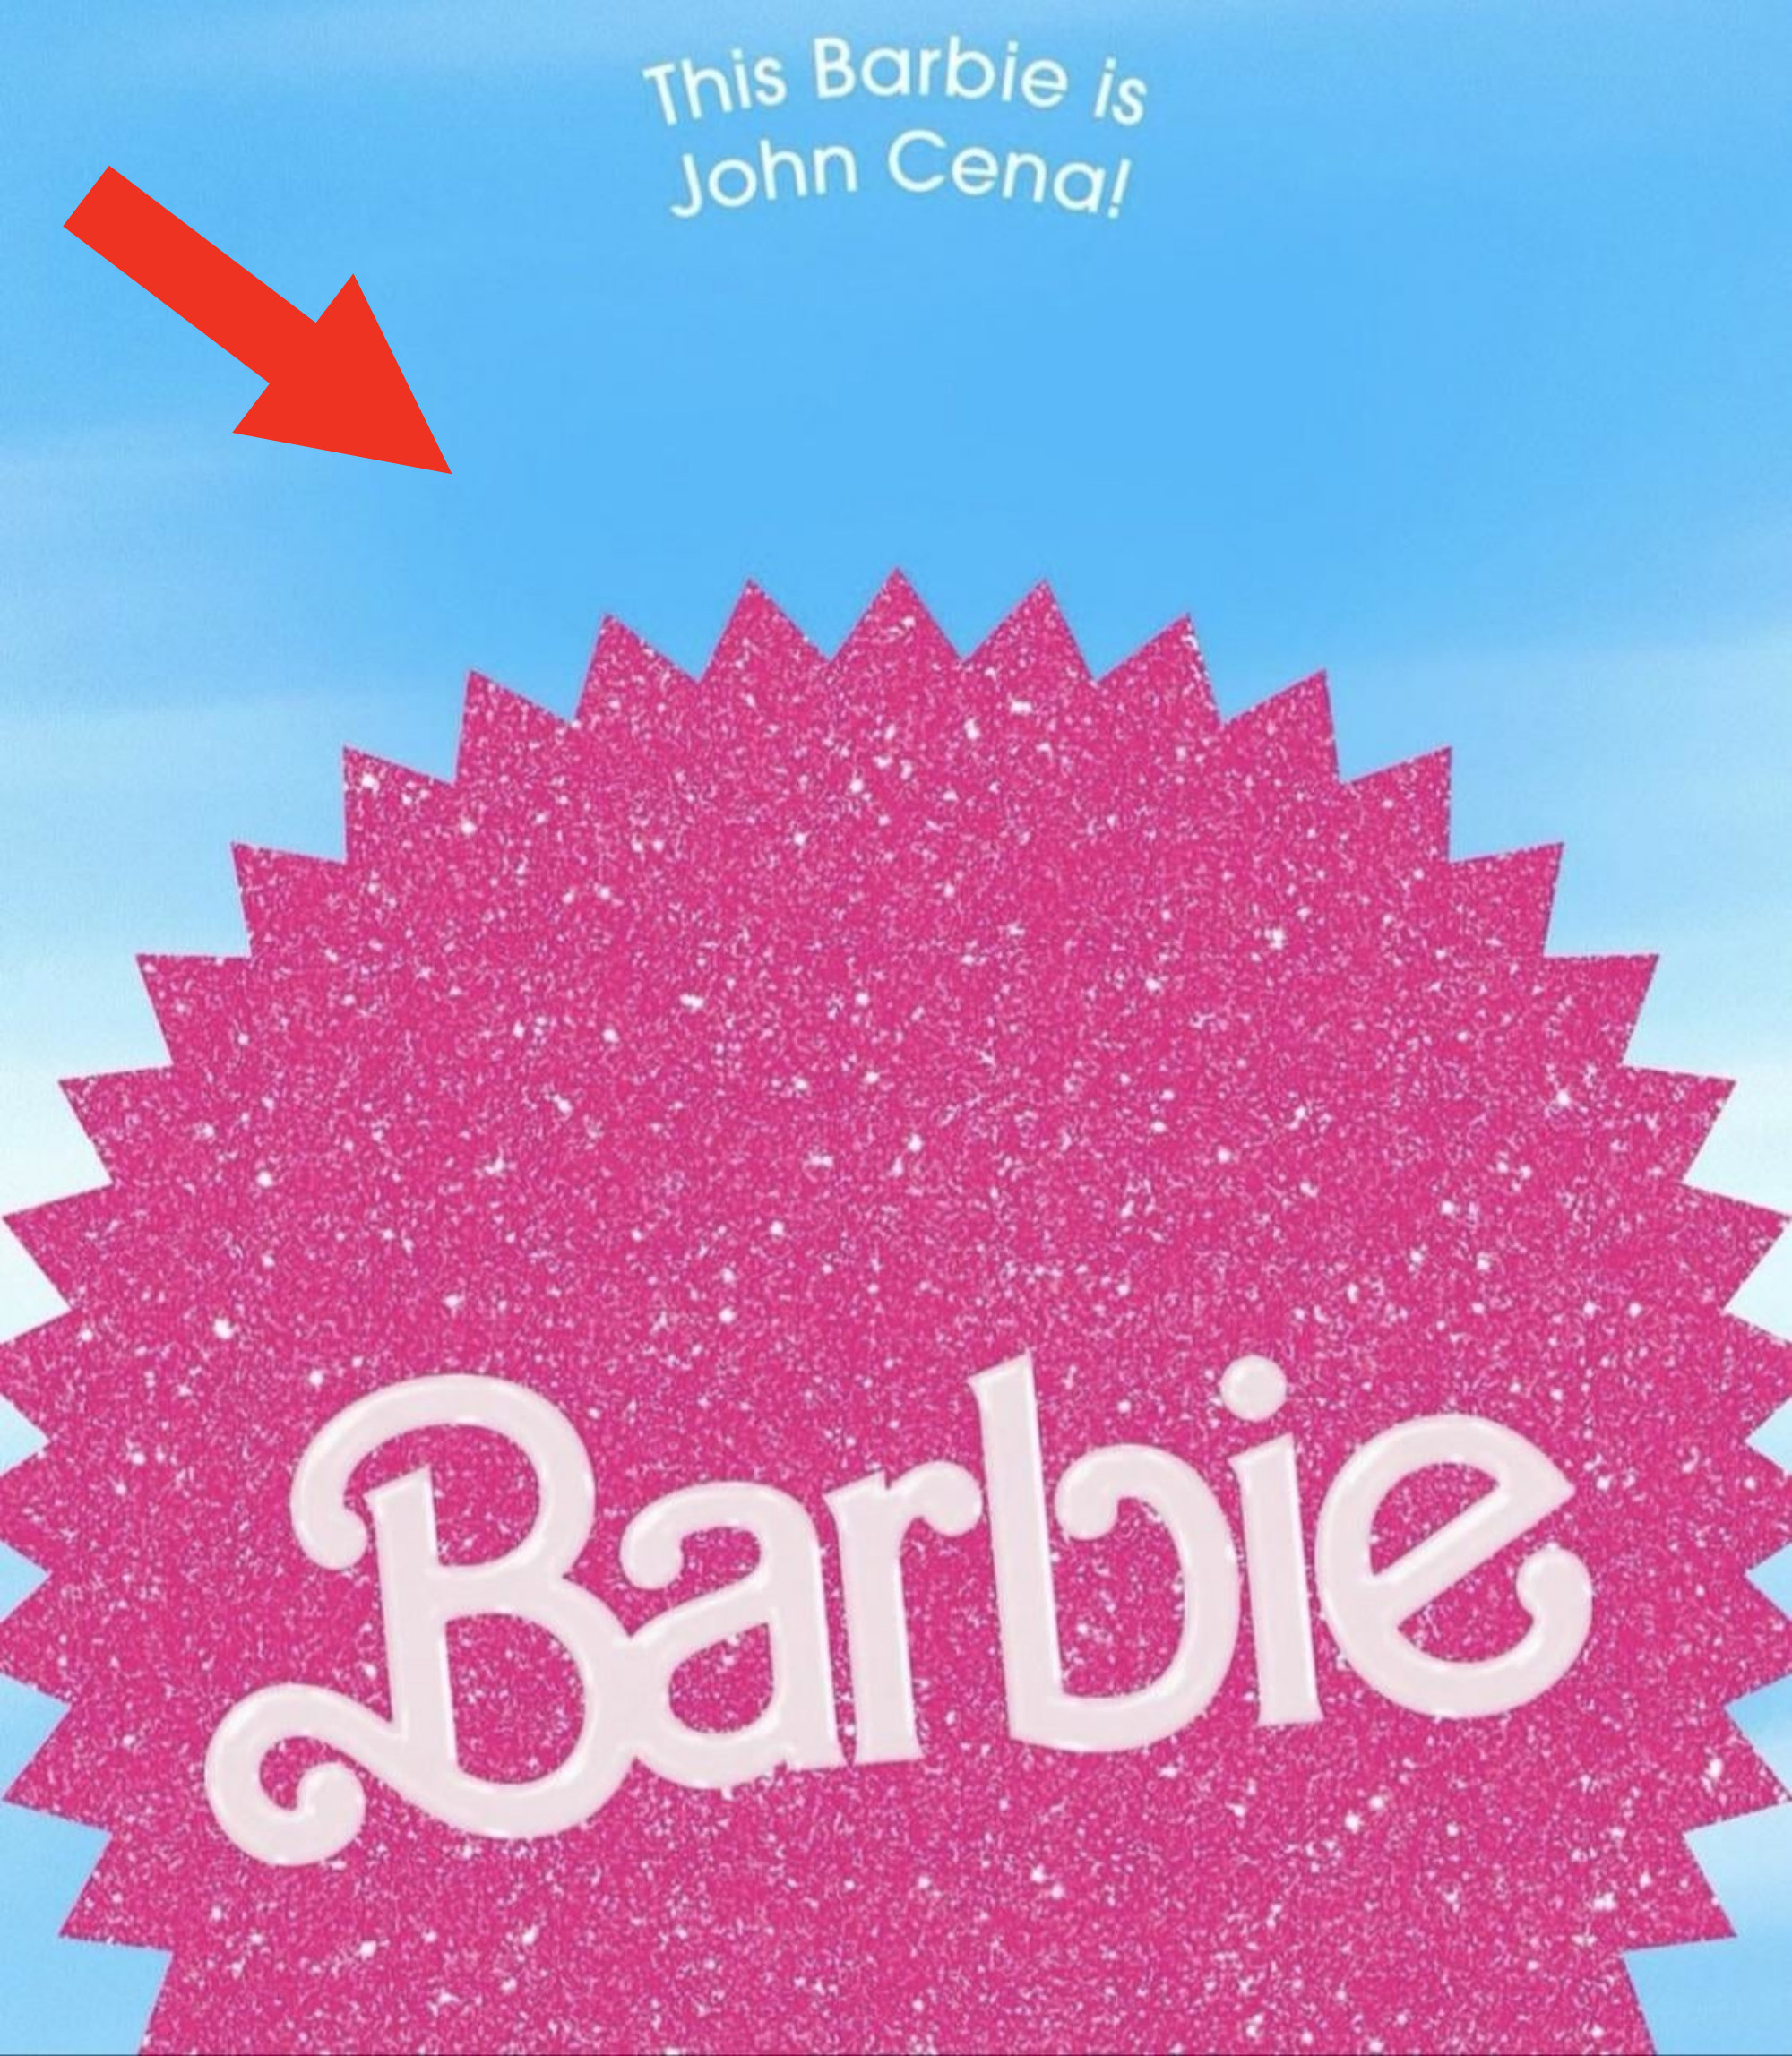 A blank &quot;Barbie&quot; poster